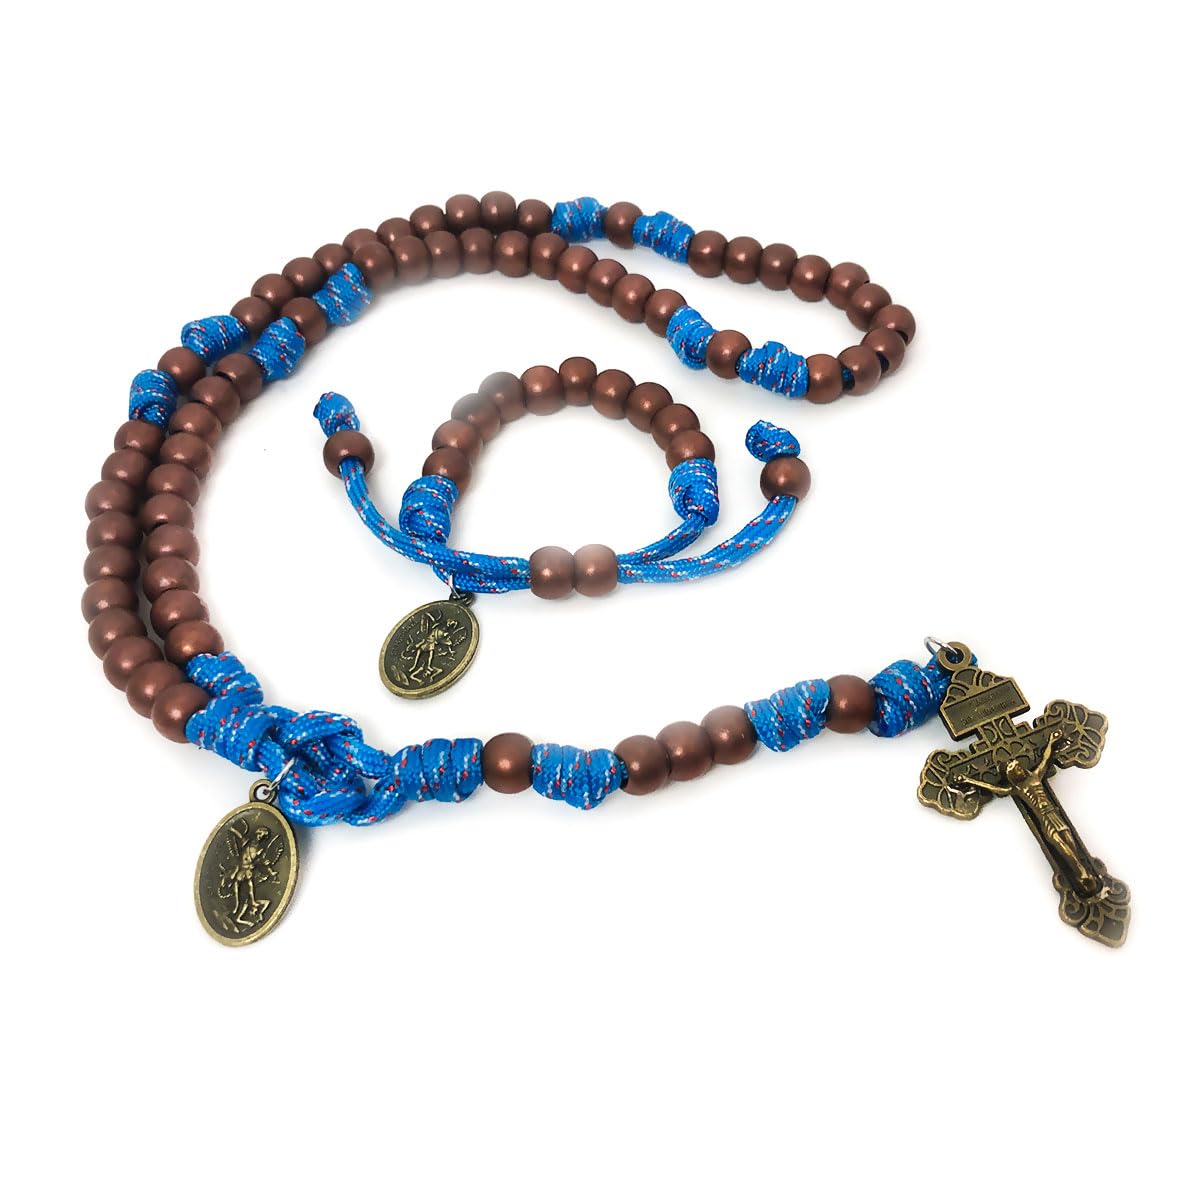 St. Michael Archangel Rosary and Bracelet Set with Crucifix and 10mm Hail Mary Beads, 10mm Copper-colored Acrylic Beads, Catholic Rosary Bracelet for Men and Women